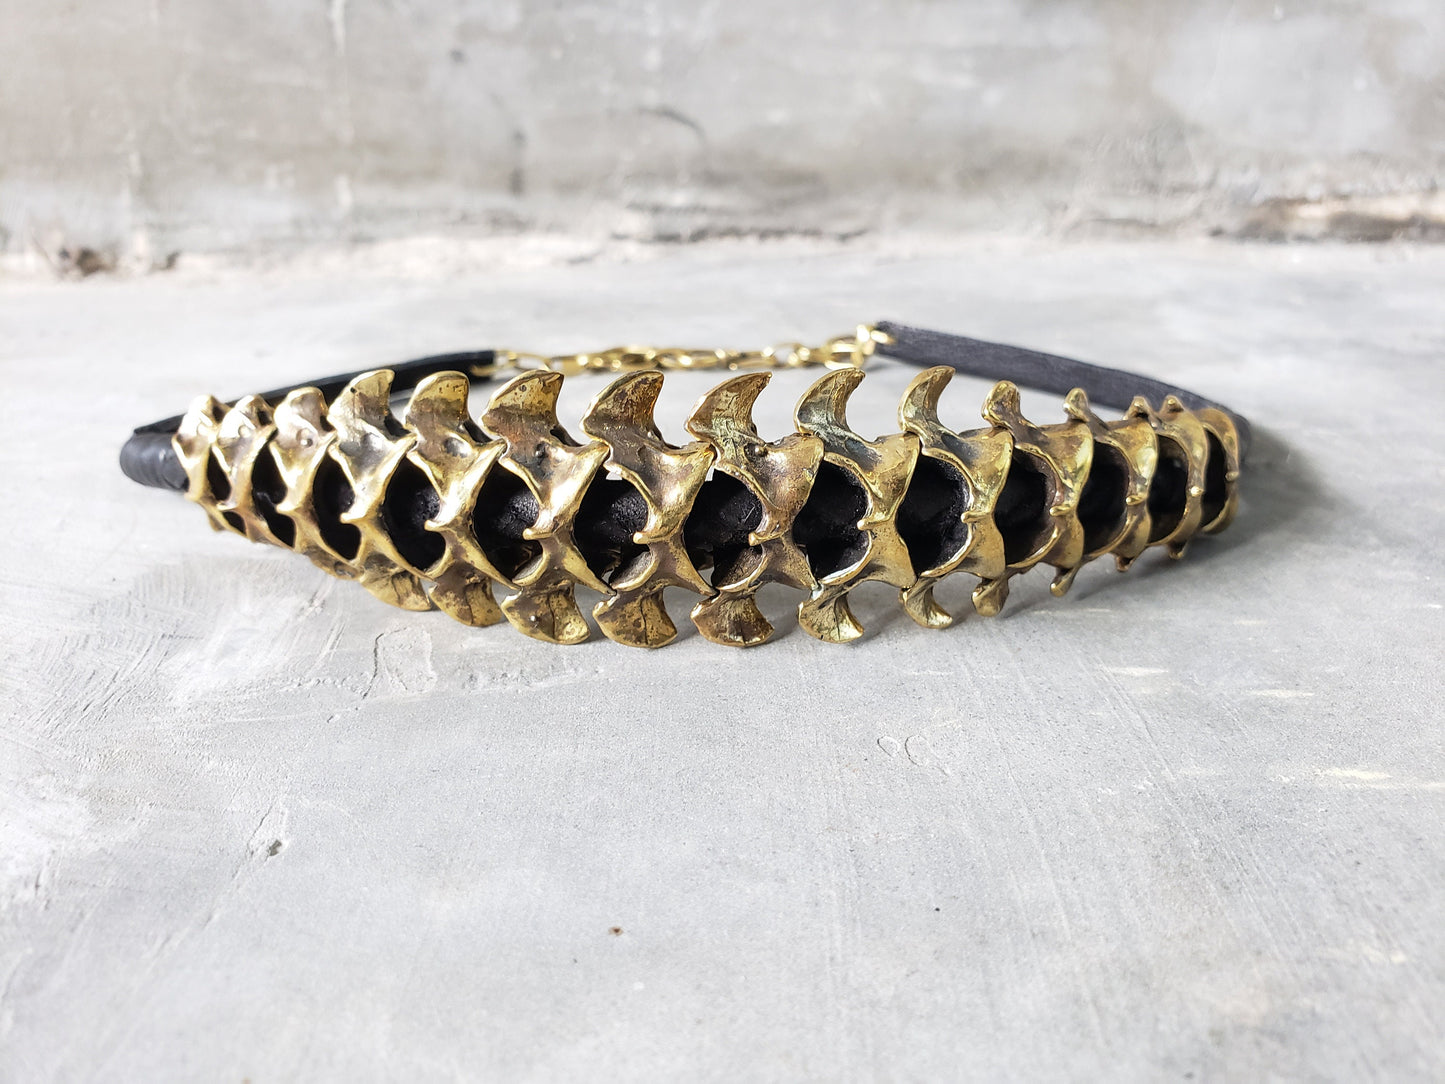 Spinal Core in Brass and Black Leather Choker